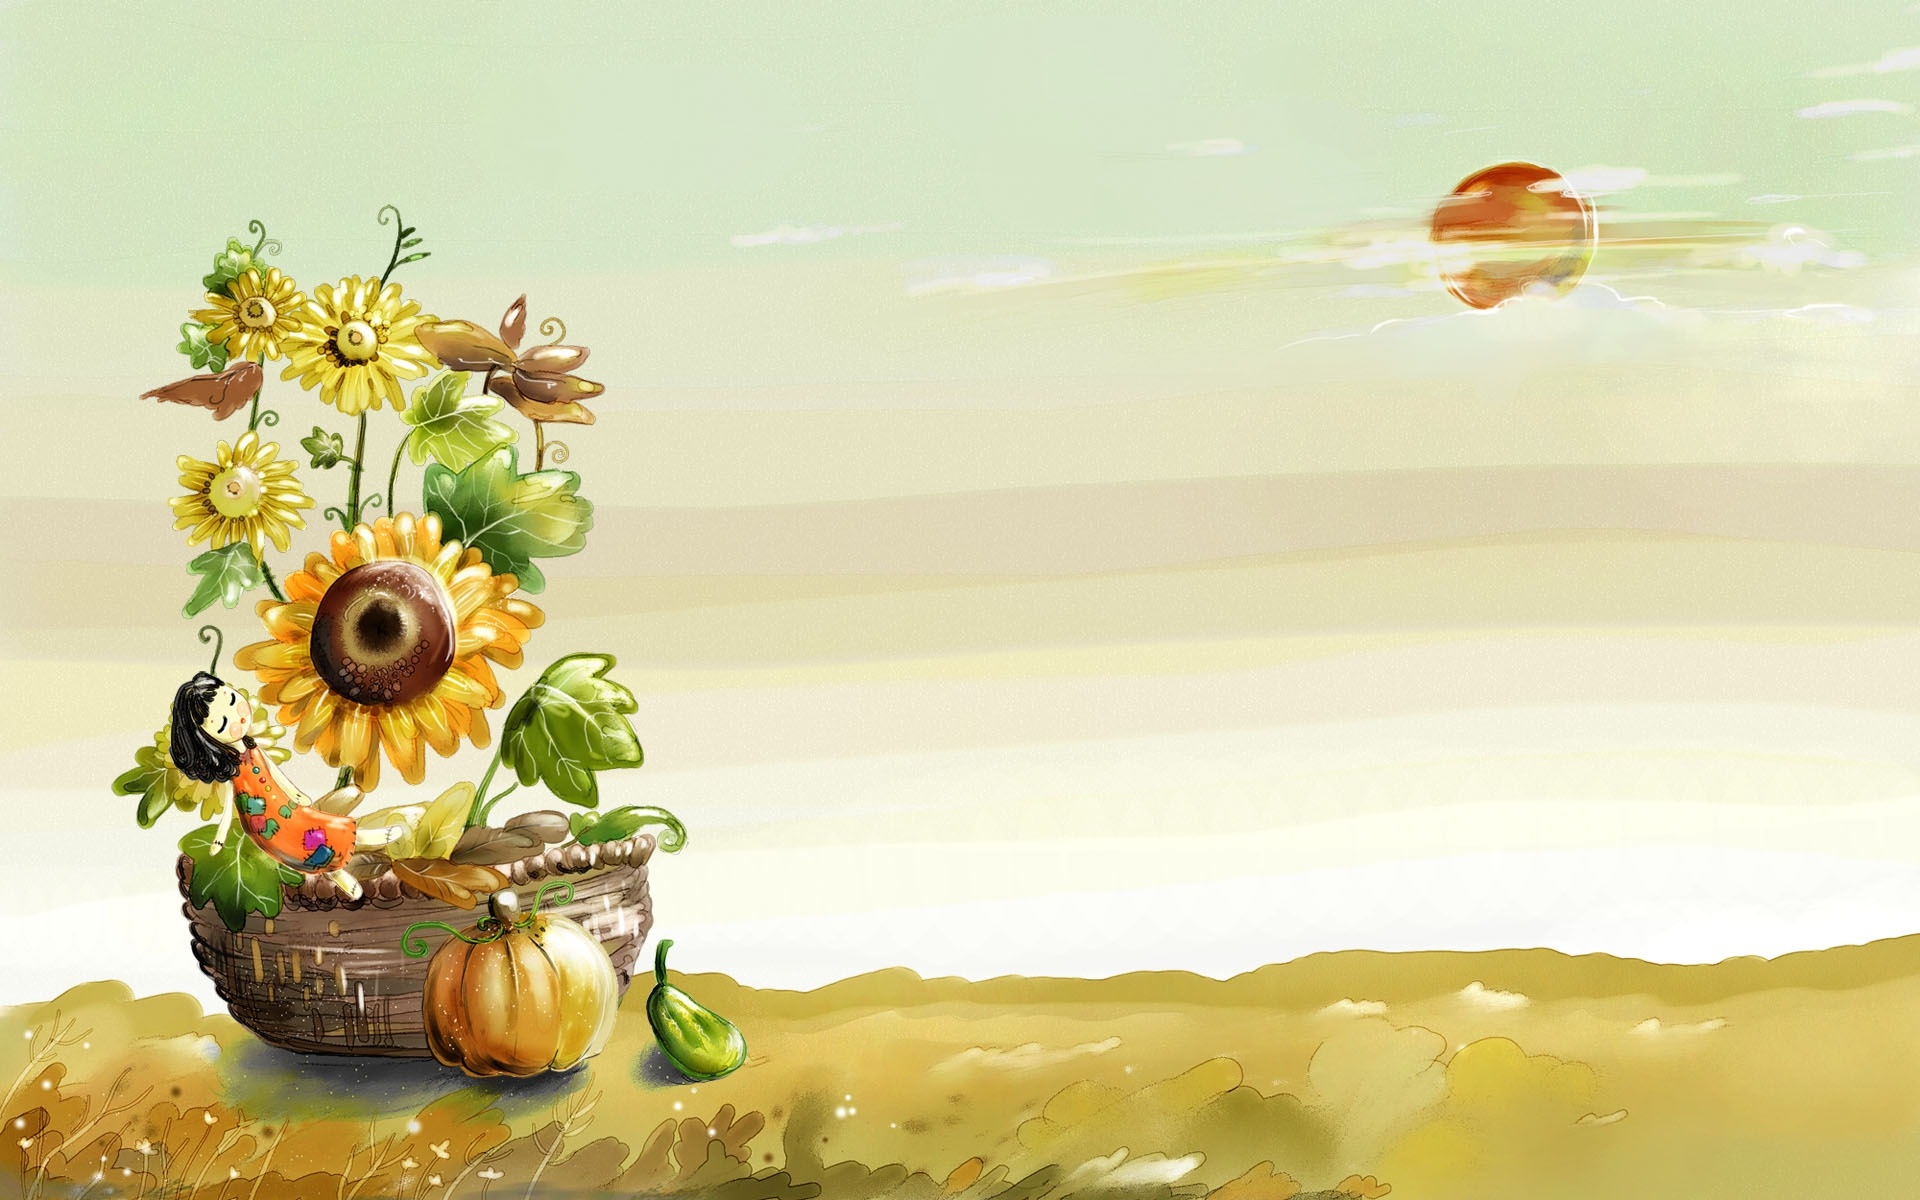 Autumn Illustration for 1920 x 1200 widescreen resolution